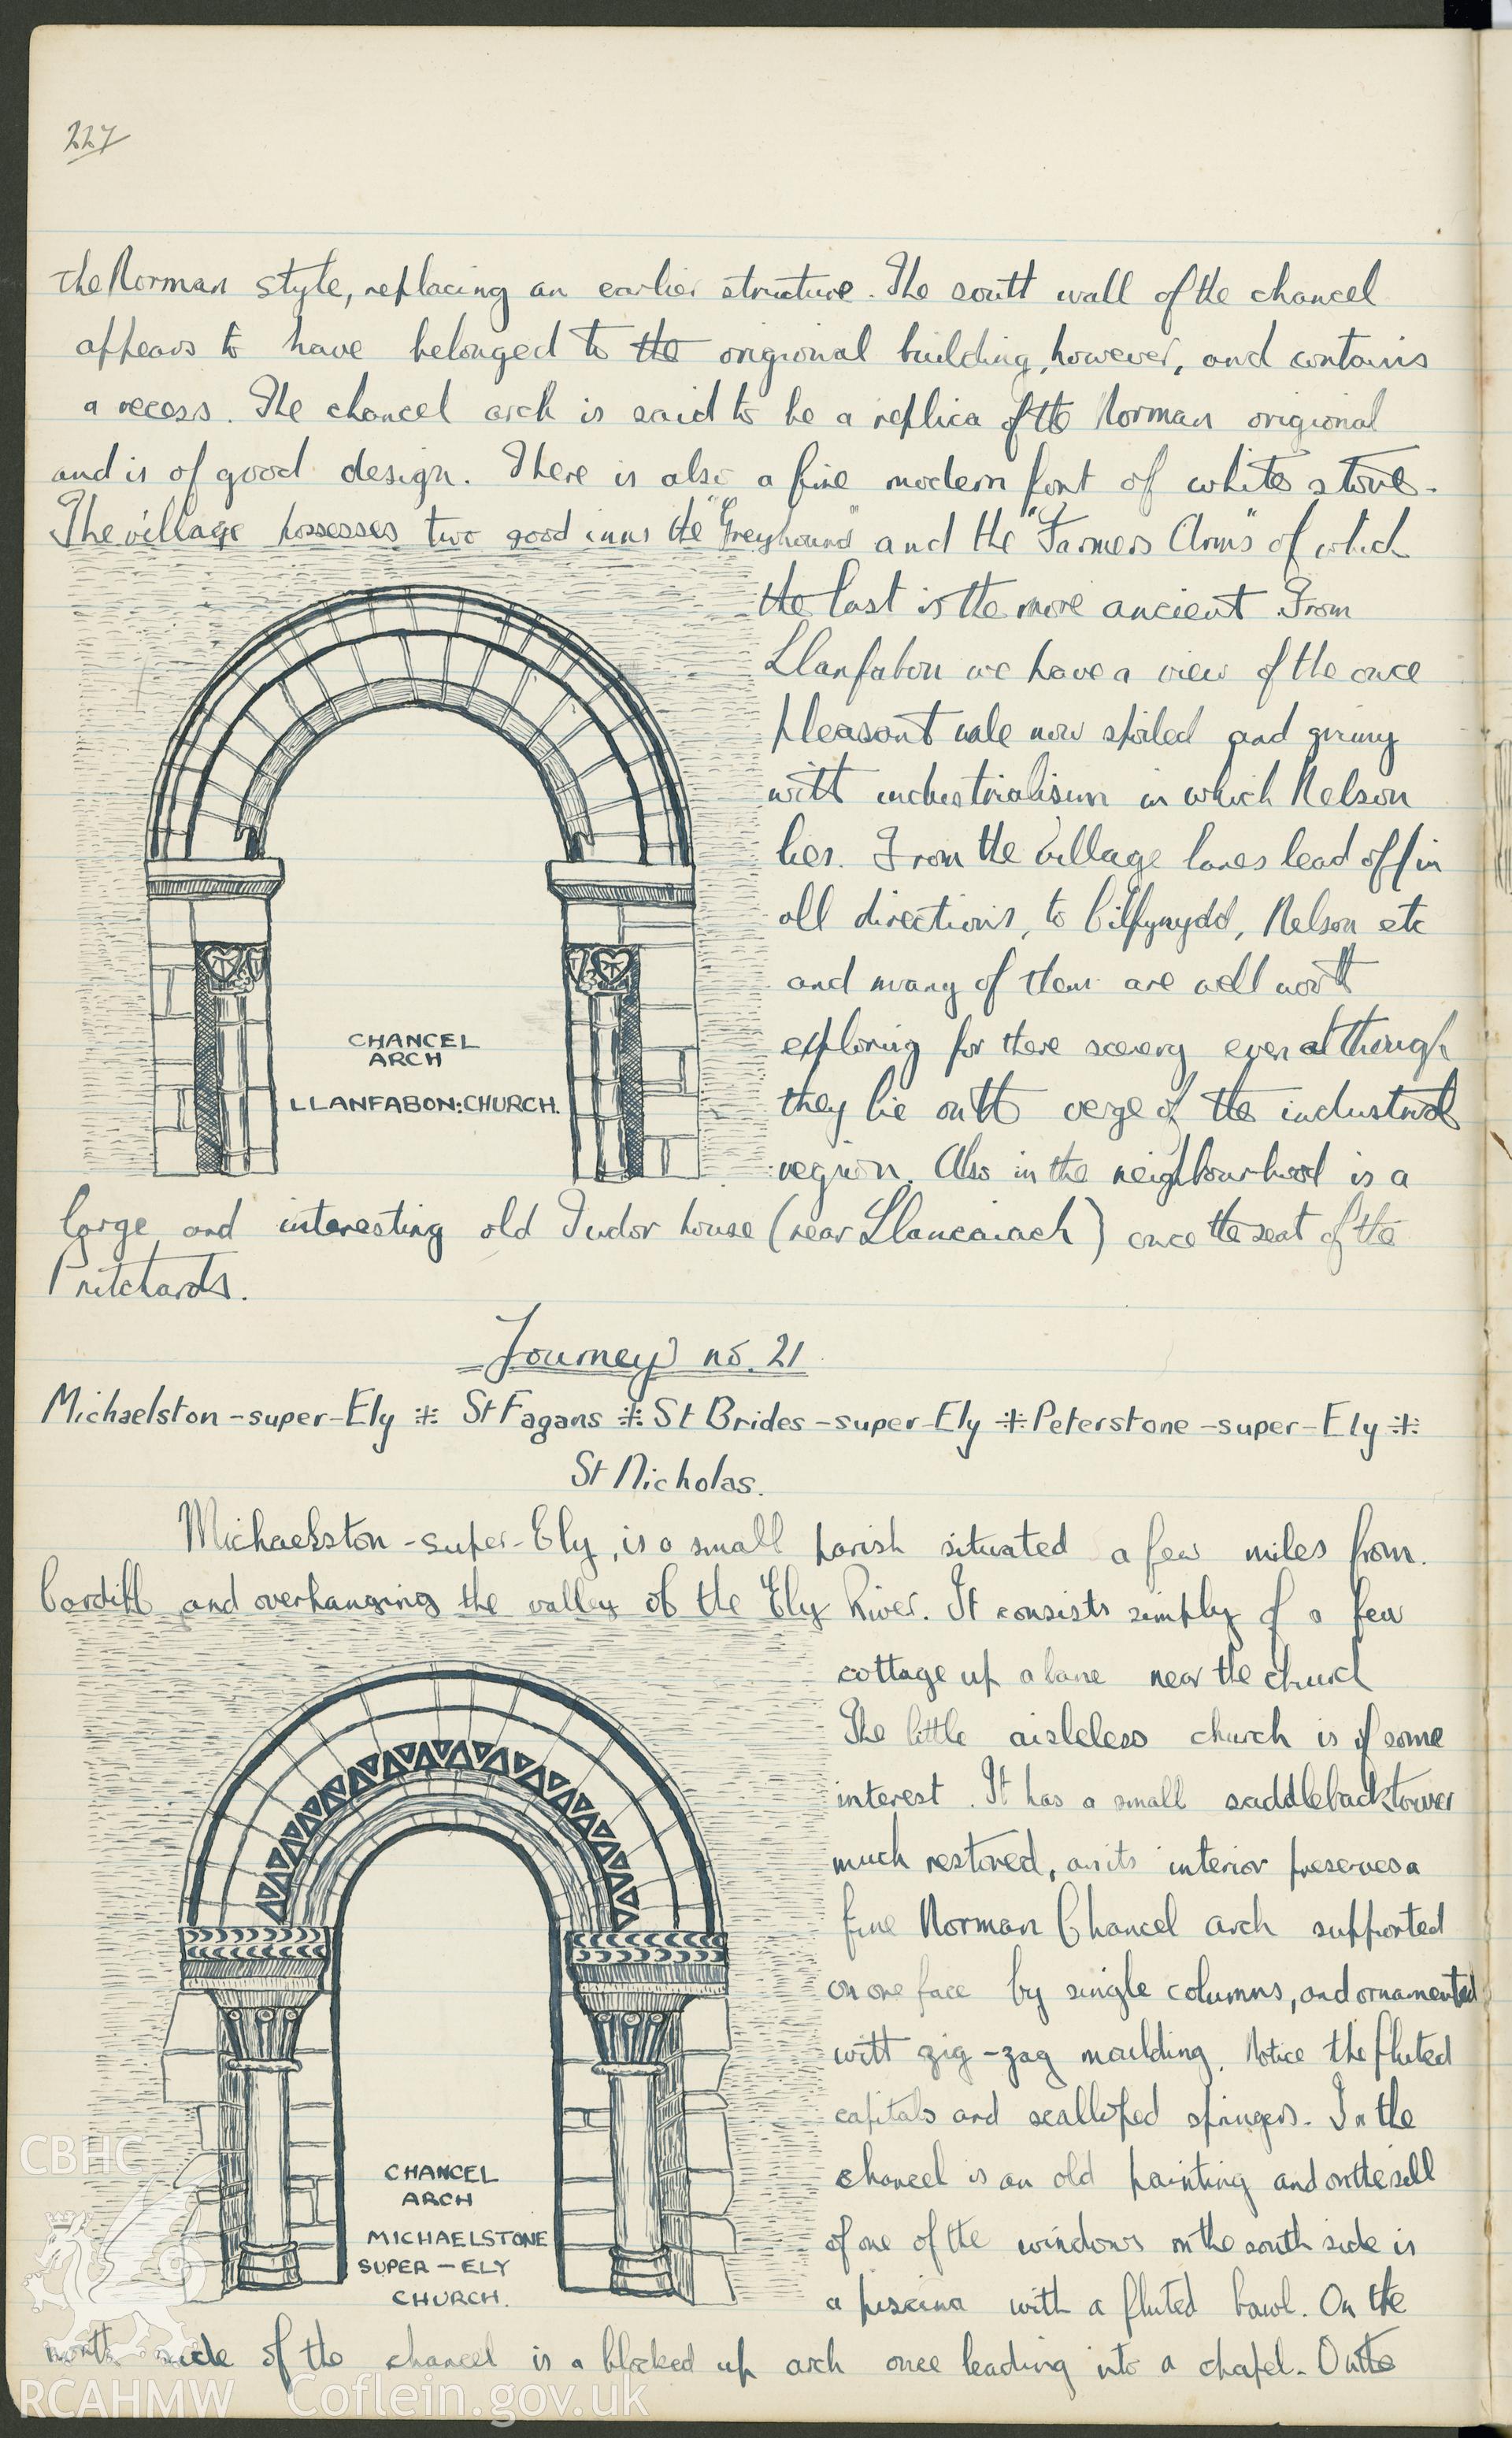 Page from a notebook featuring an illustration by R.E. Kay showing  chancel arches at Llanfabon Church and Michaelston Super Ely Church. As featured on p227 of R.E. Kay Notebook Series I, Vol II.